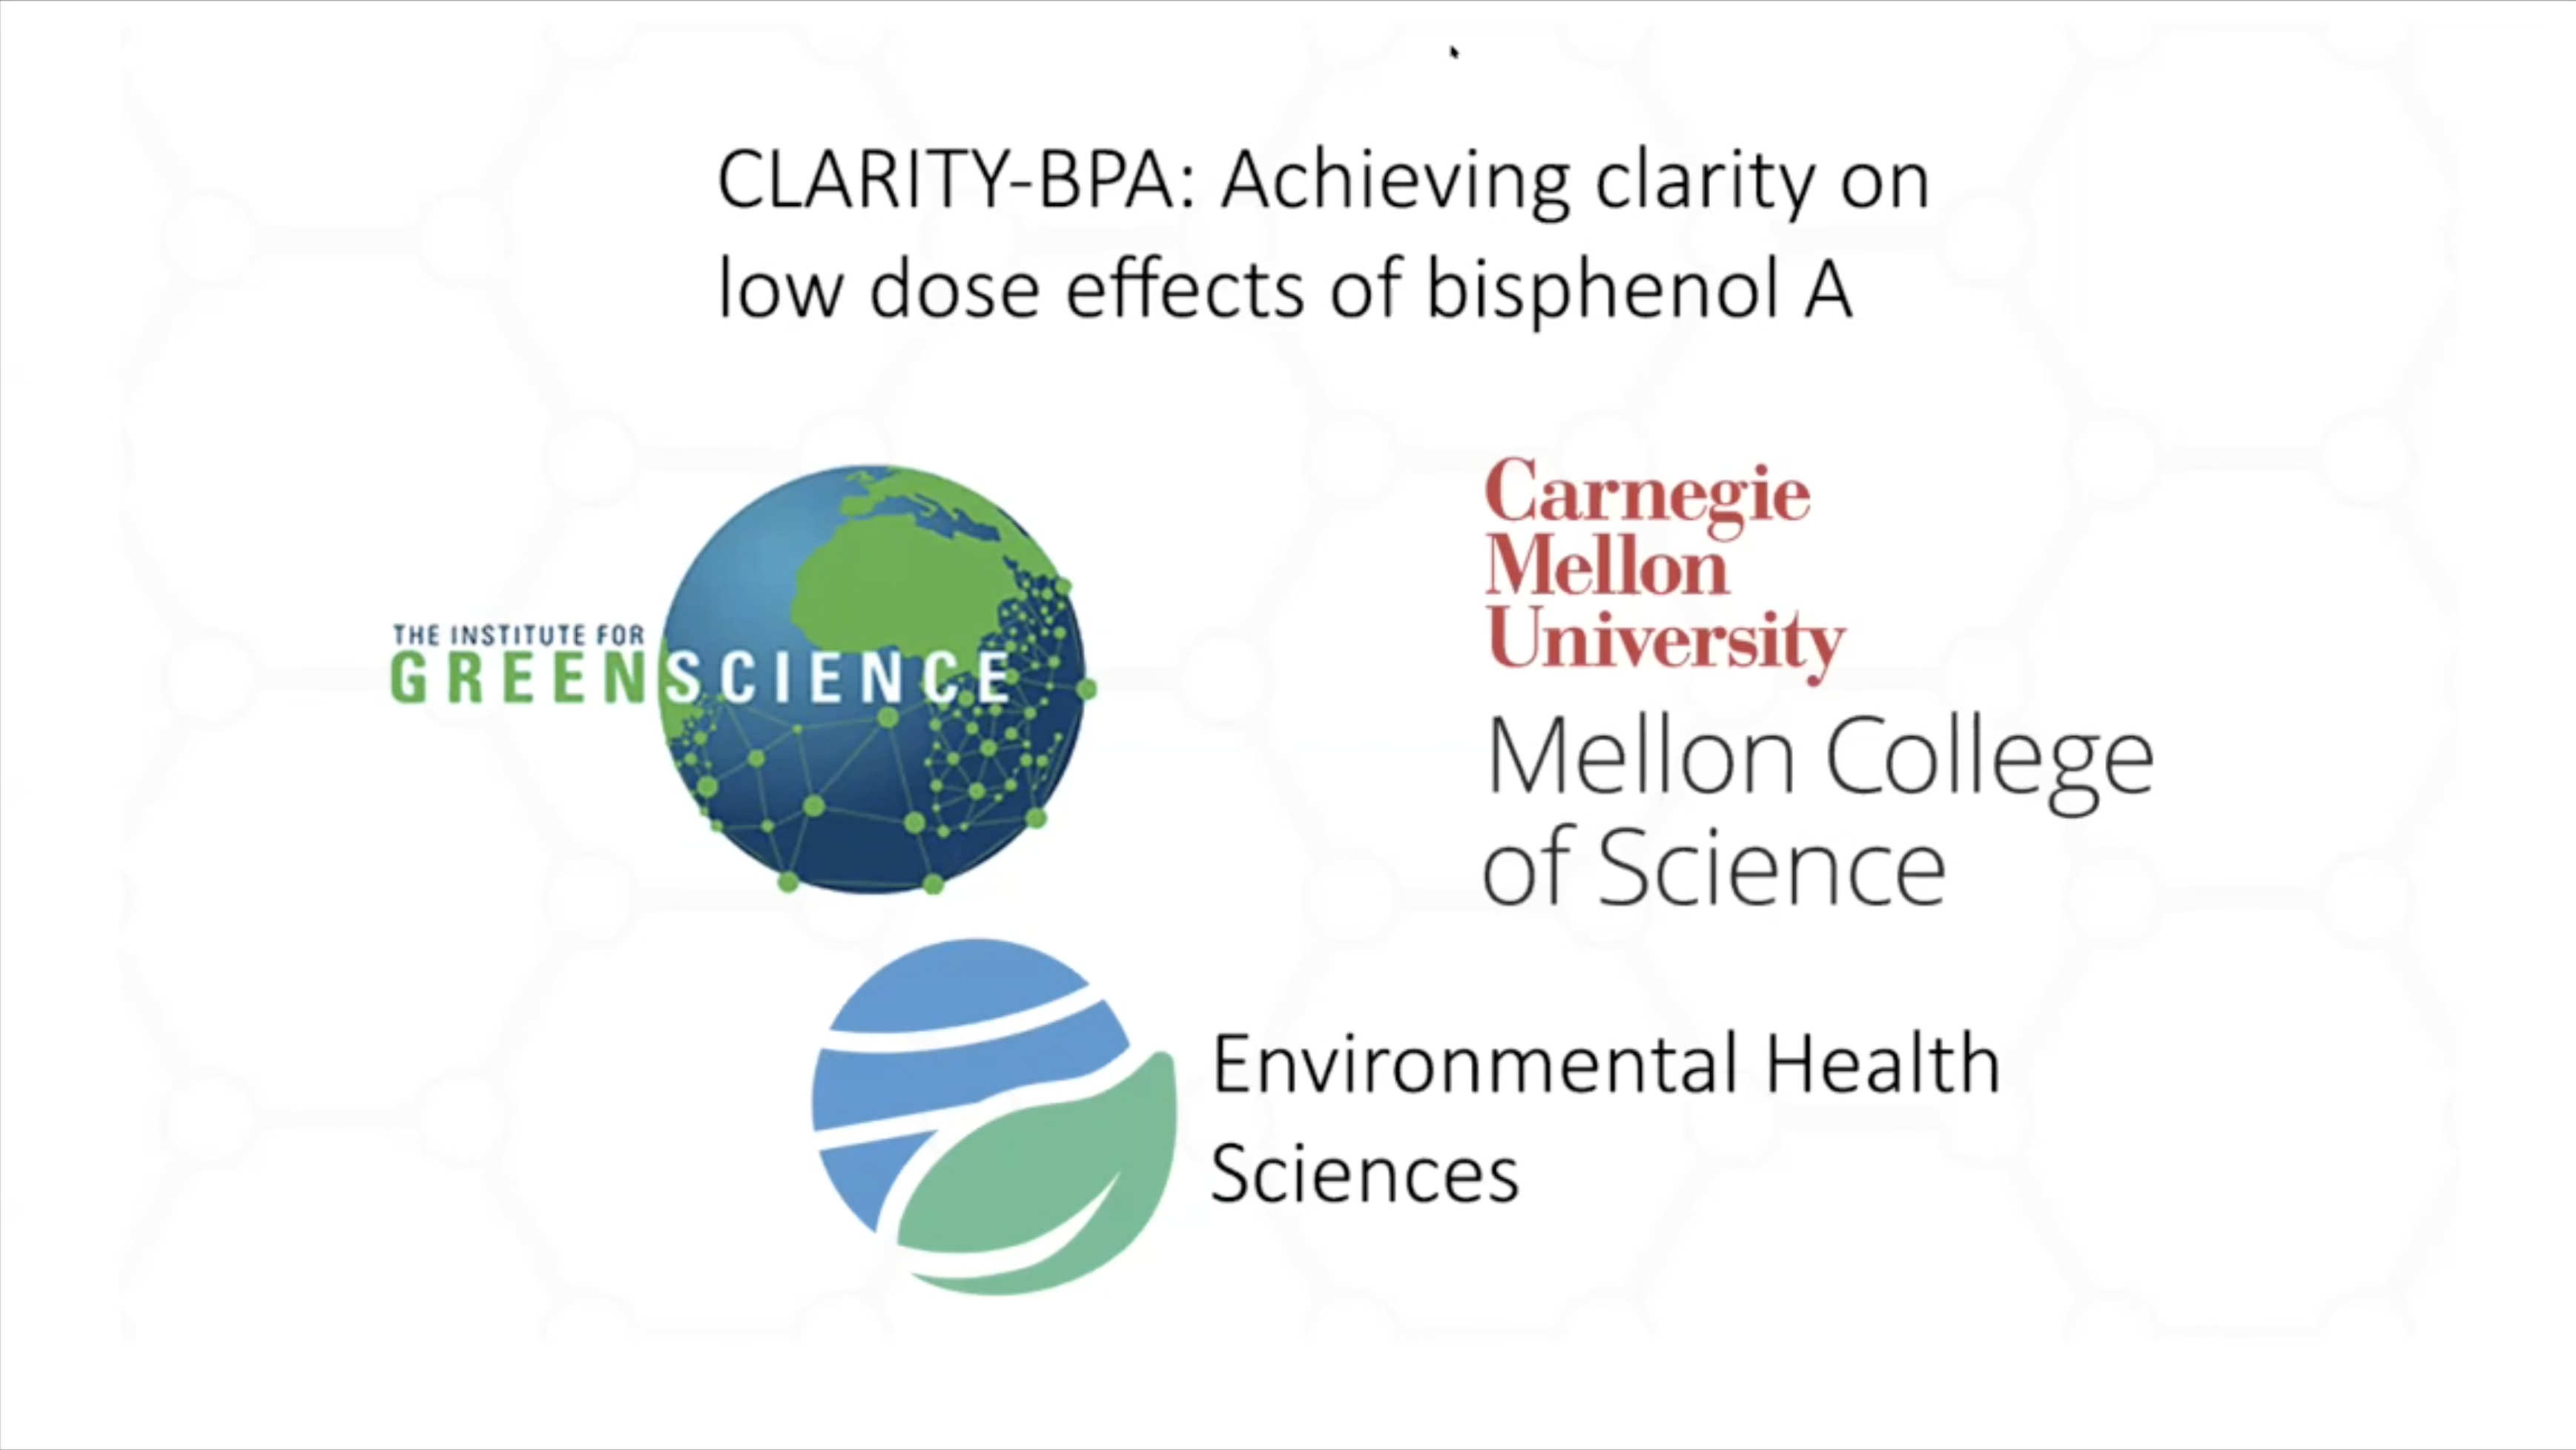 Webinar title: CLARITY-BPA: Achieving clarity on low dose effects of bisphenol A, with logos of CMU, IGS and EHS